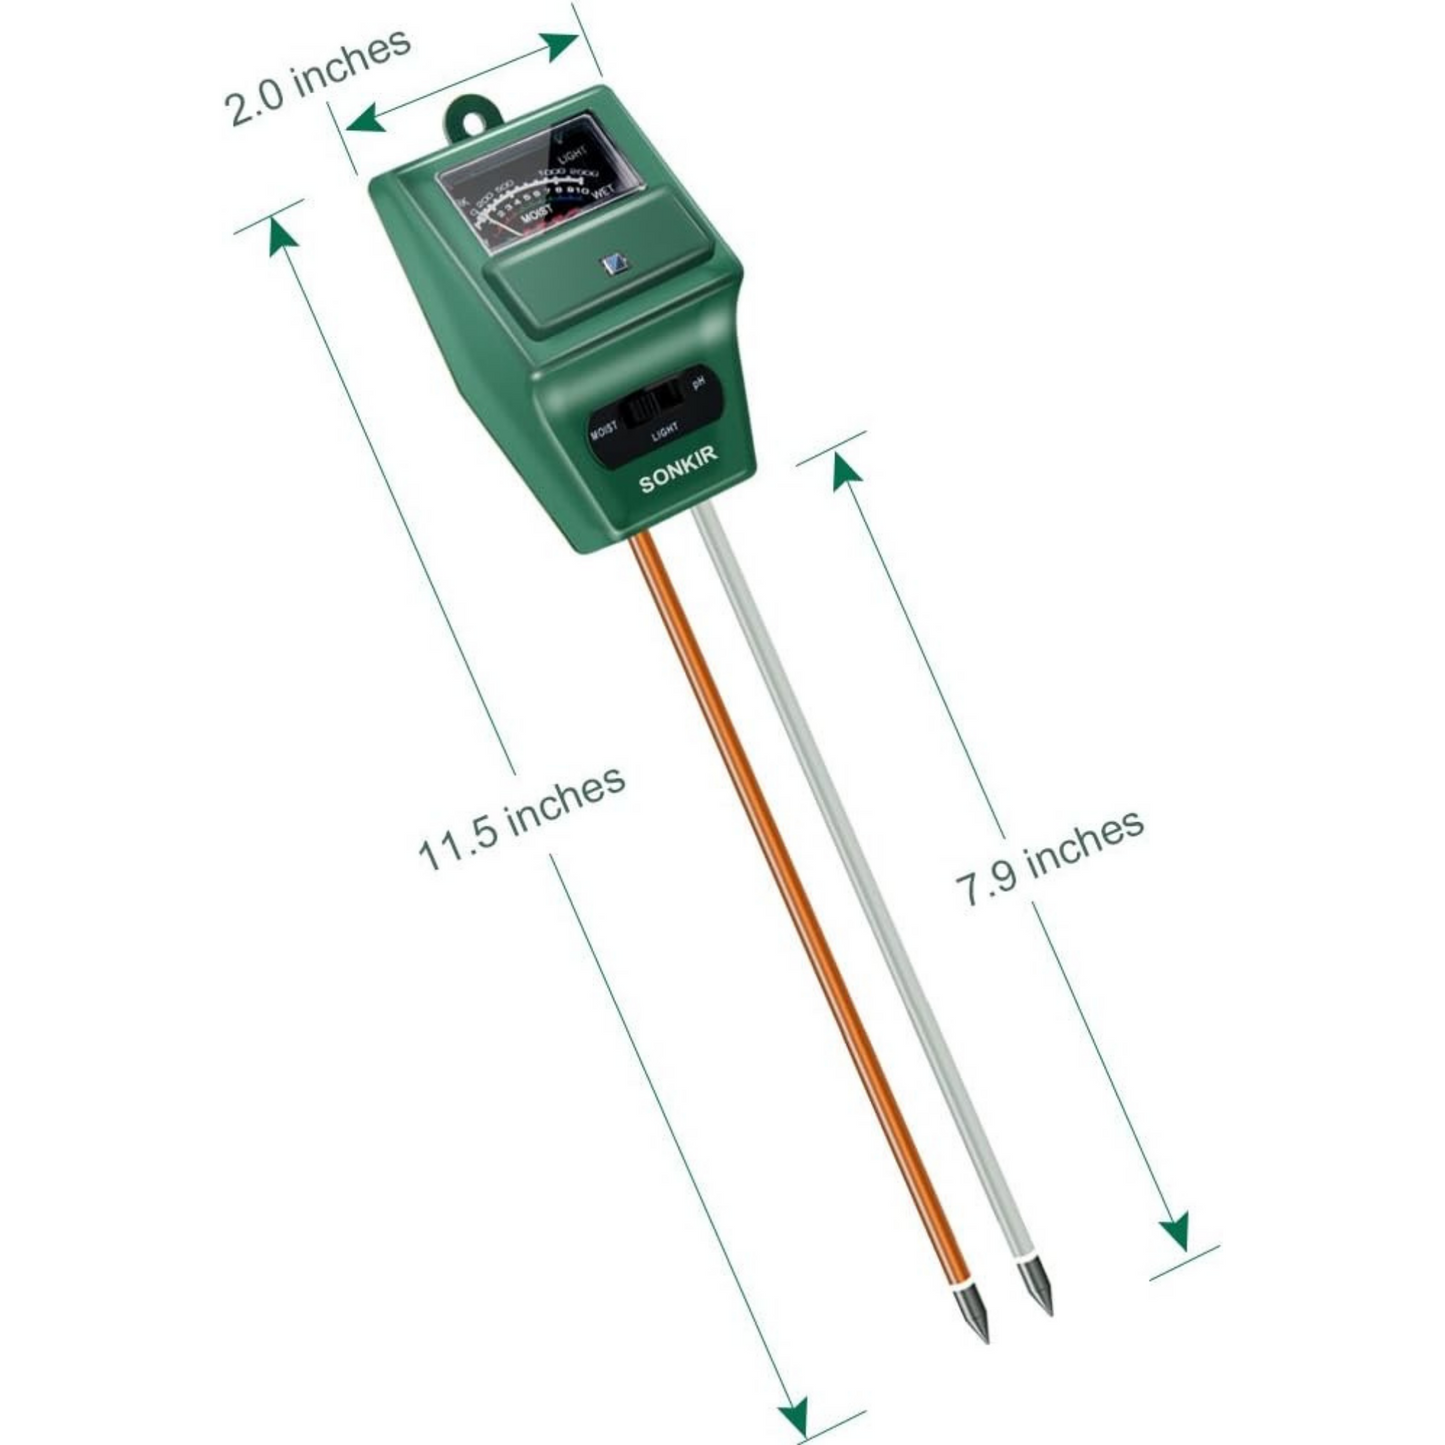 Close-up of the pH meter dimensions including length and height as well as moisture tester probe length